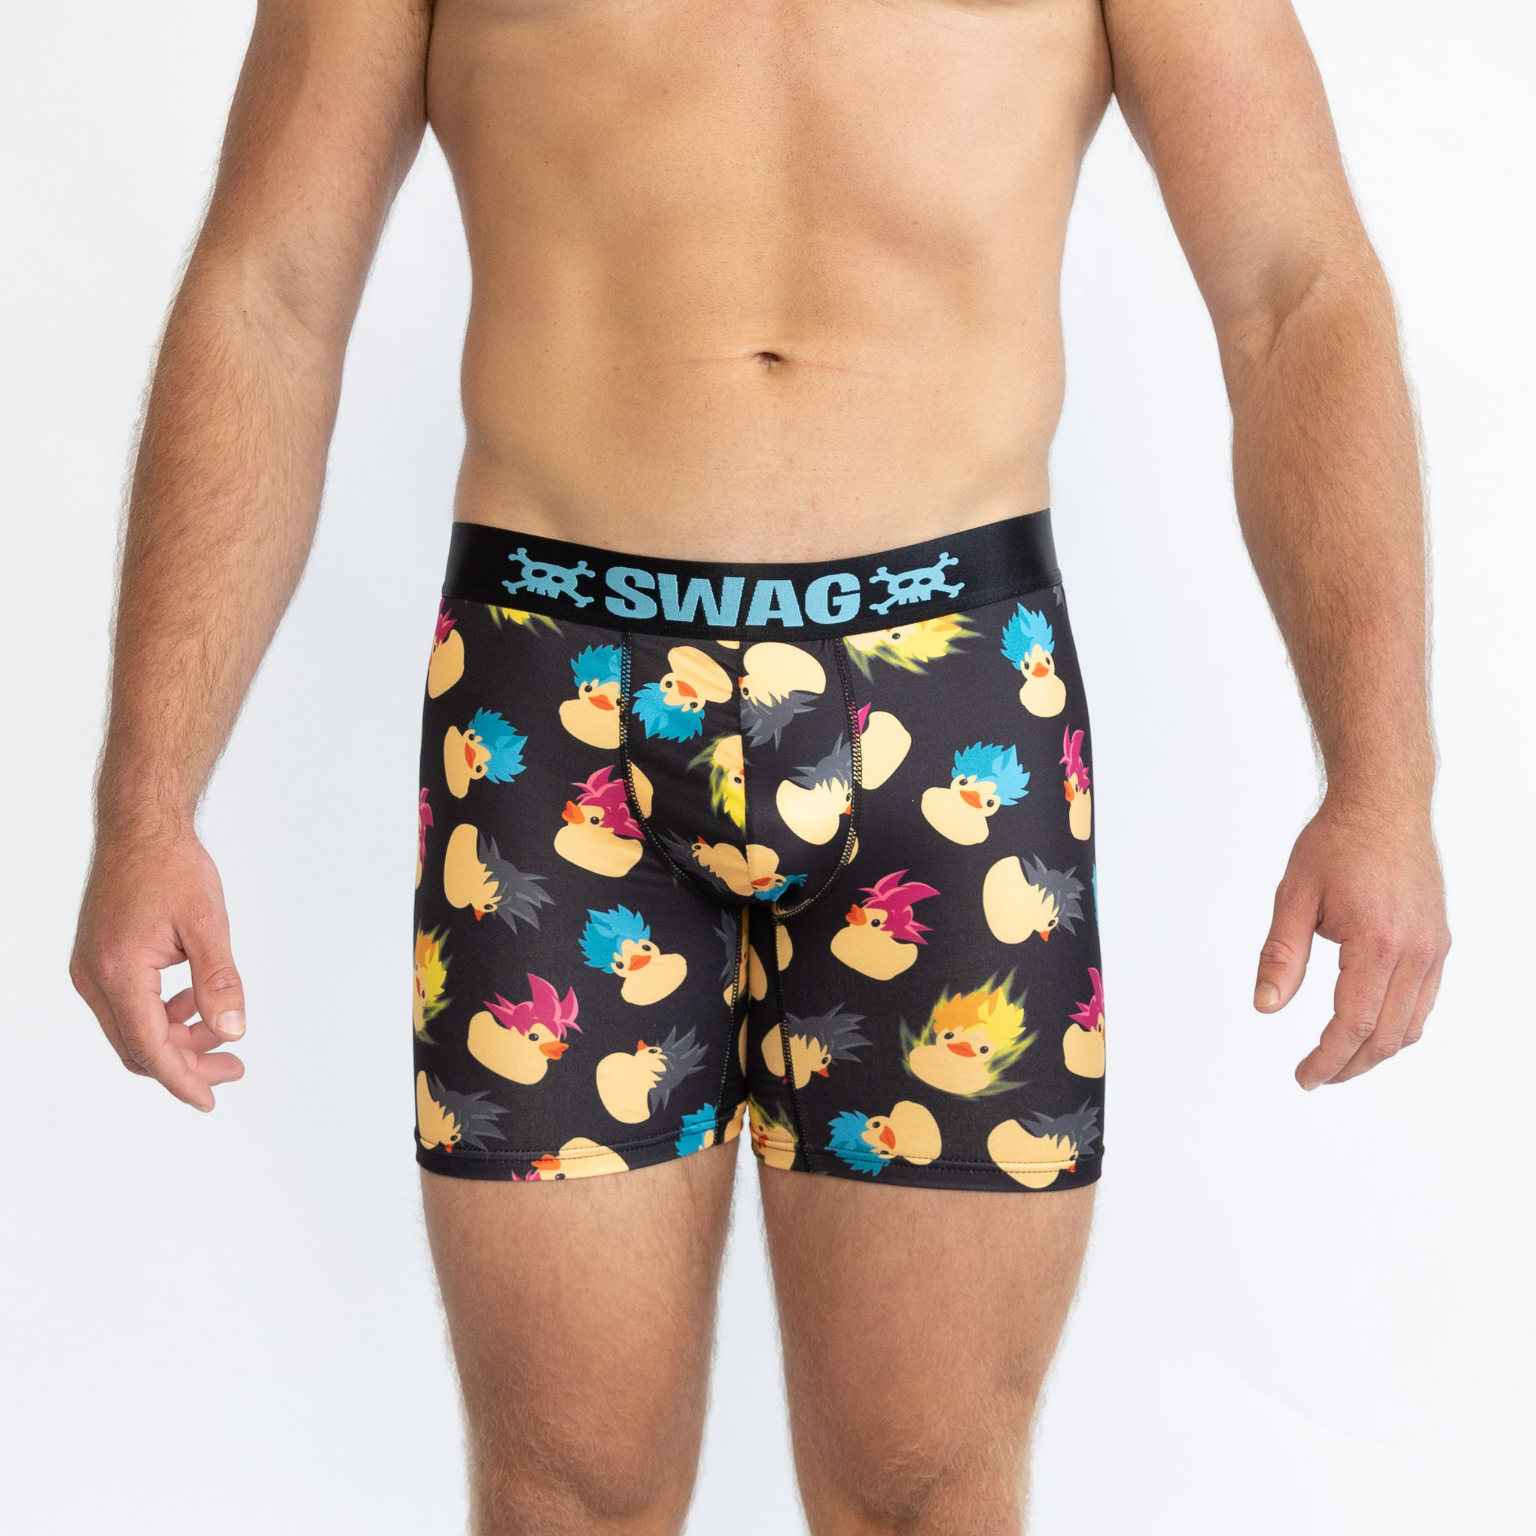 Explore Swag's Men's Underwear Collection: Facts, Styles, and Comfort